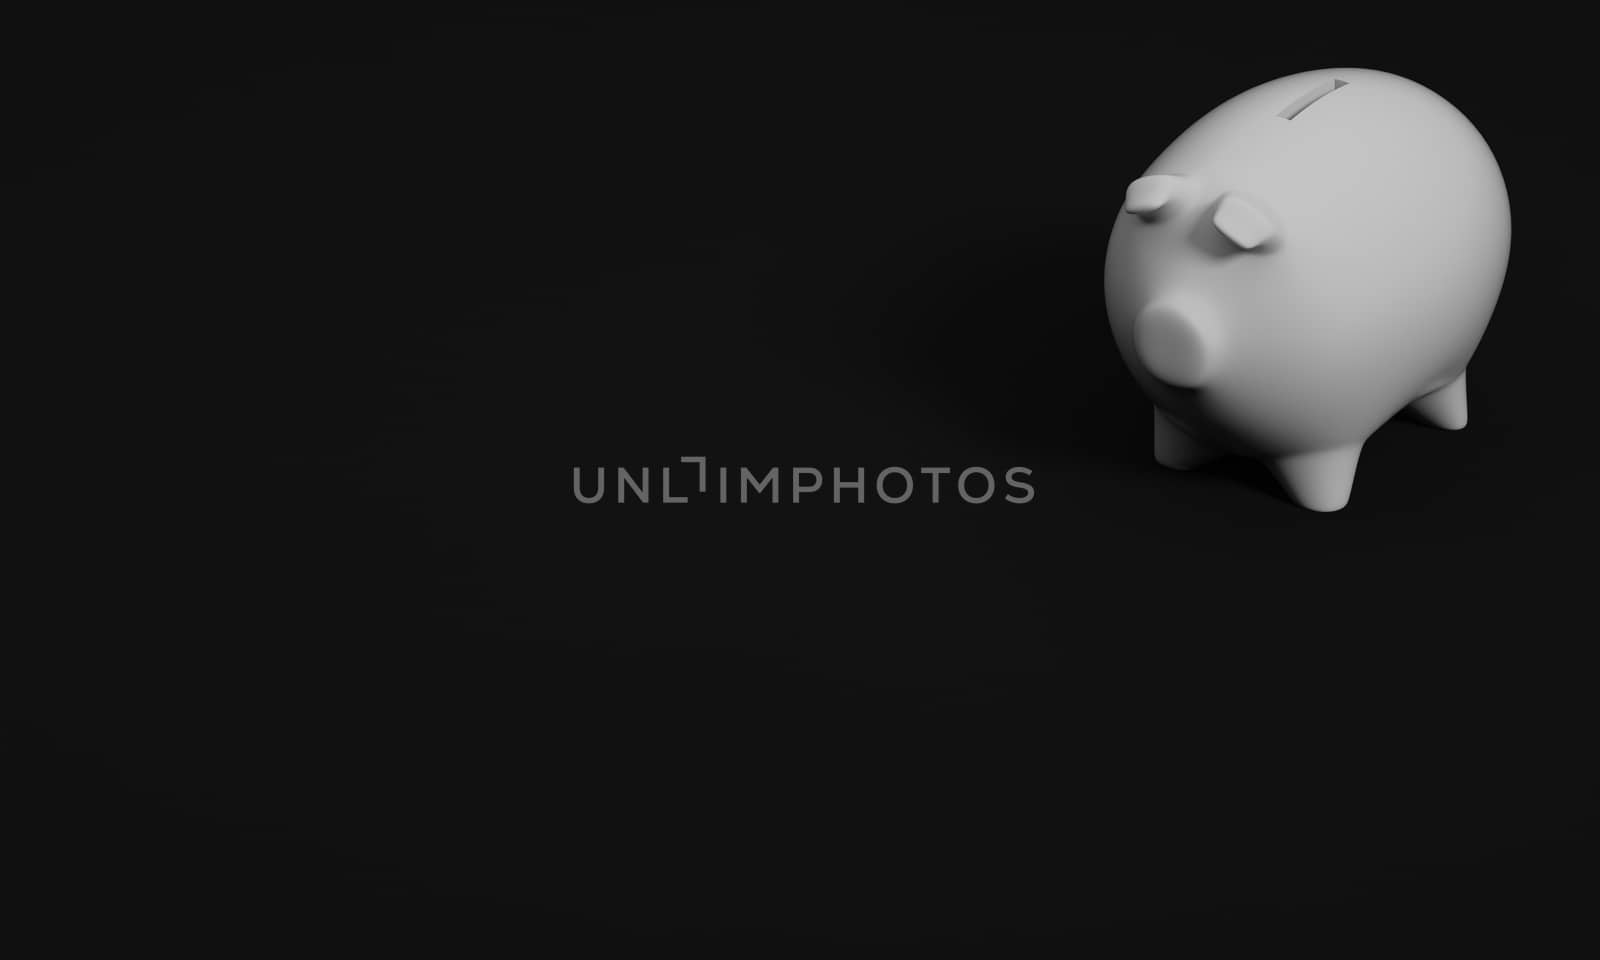 BLACK AND WHITE PHOTO OF PIGGY BANK ON PLAIN BACKGROUND